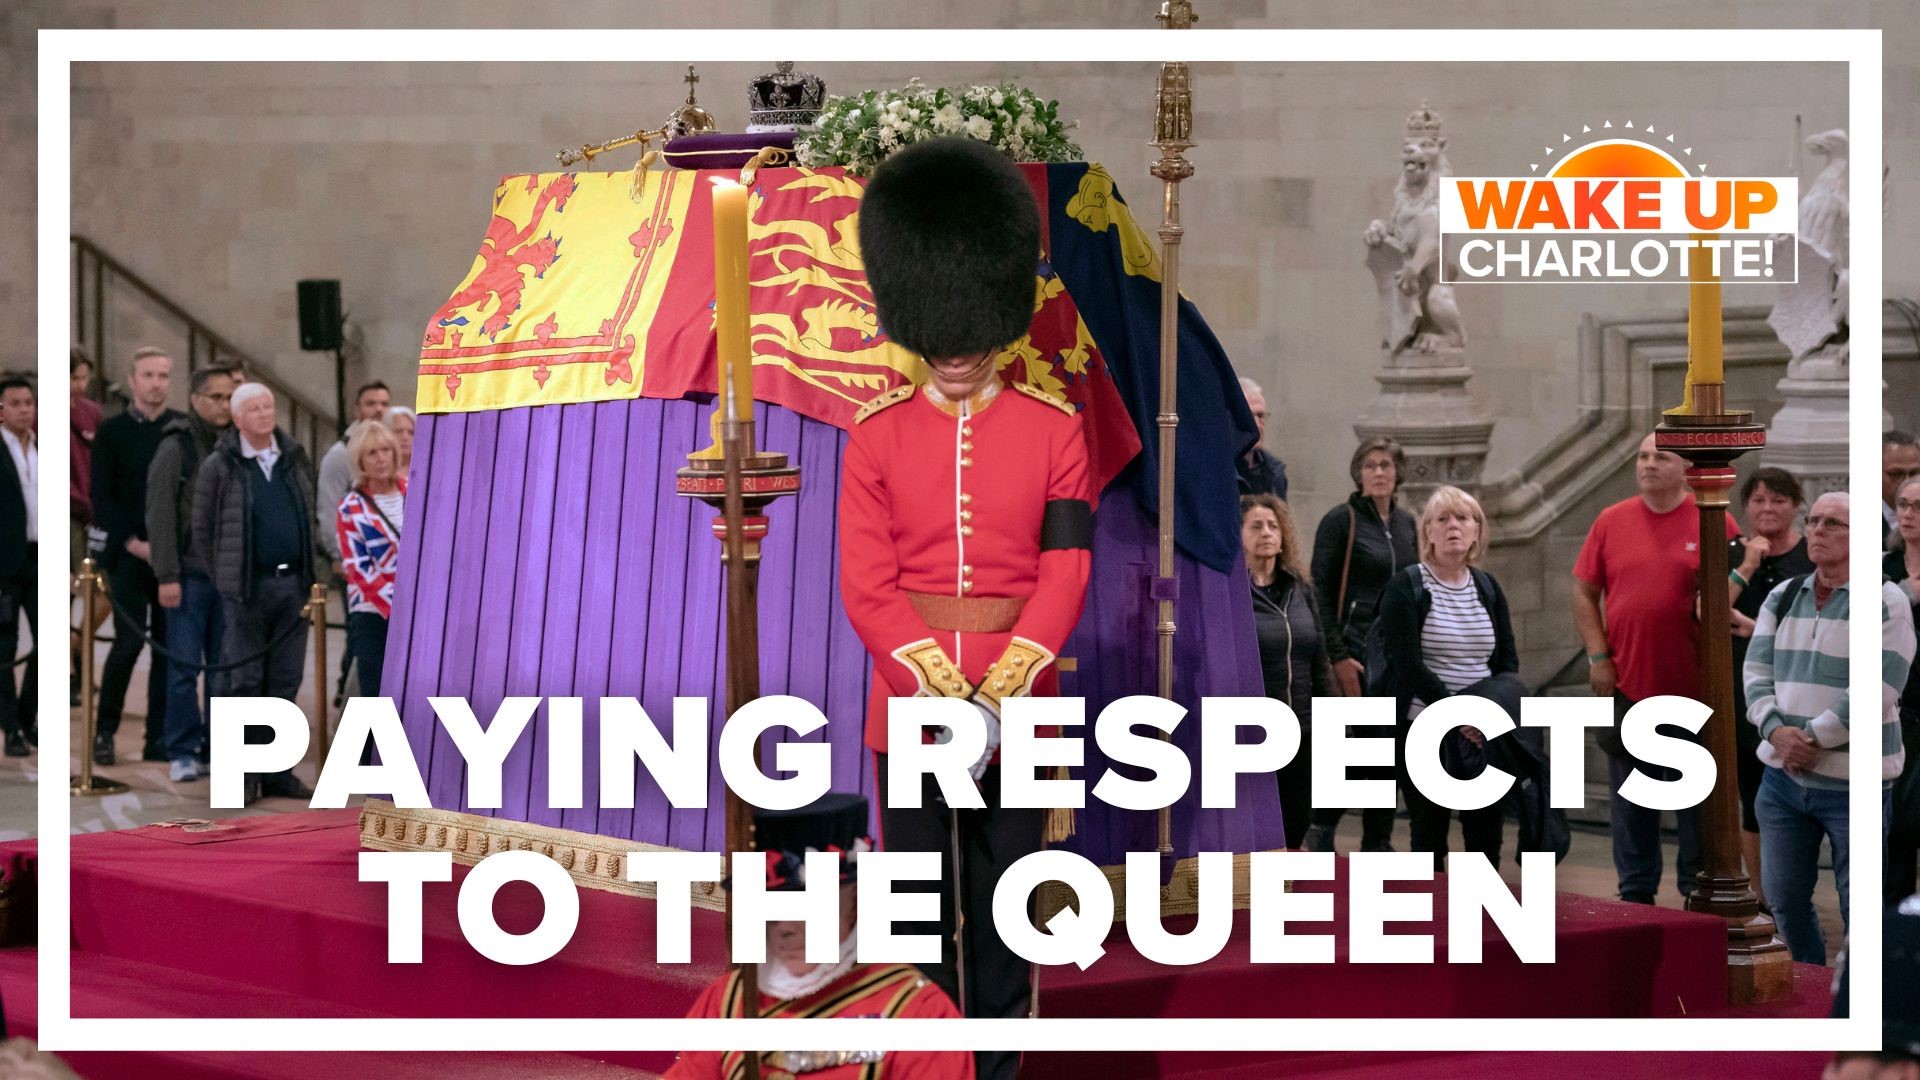 Officials in London say there are at least 40,000 people in line waiting to say their final goodbye and to pay respect to the late Queen Elizabeth II.